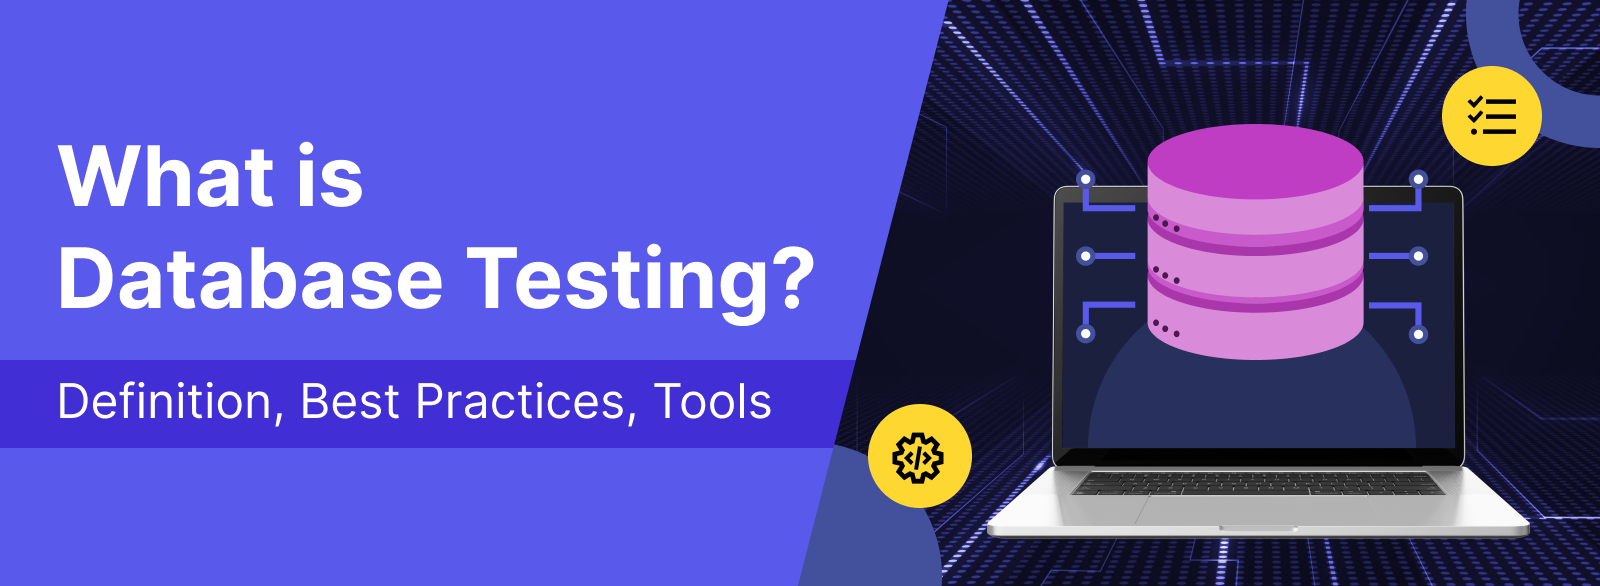 What is Database Testing? Definition, Best Practices, Tools 